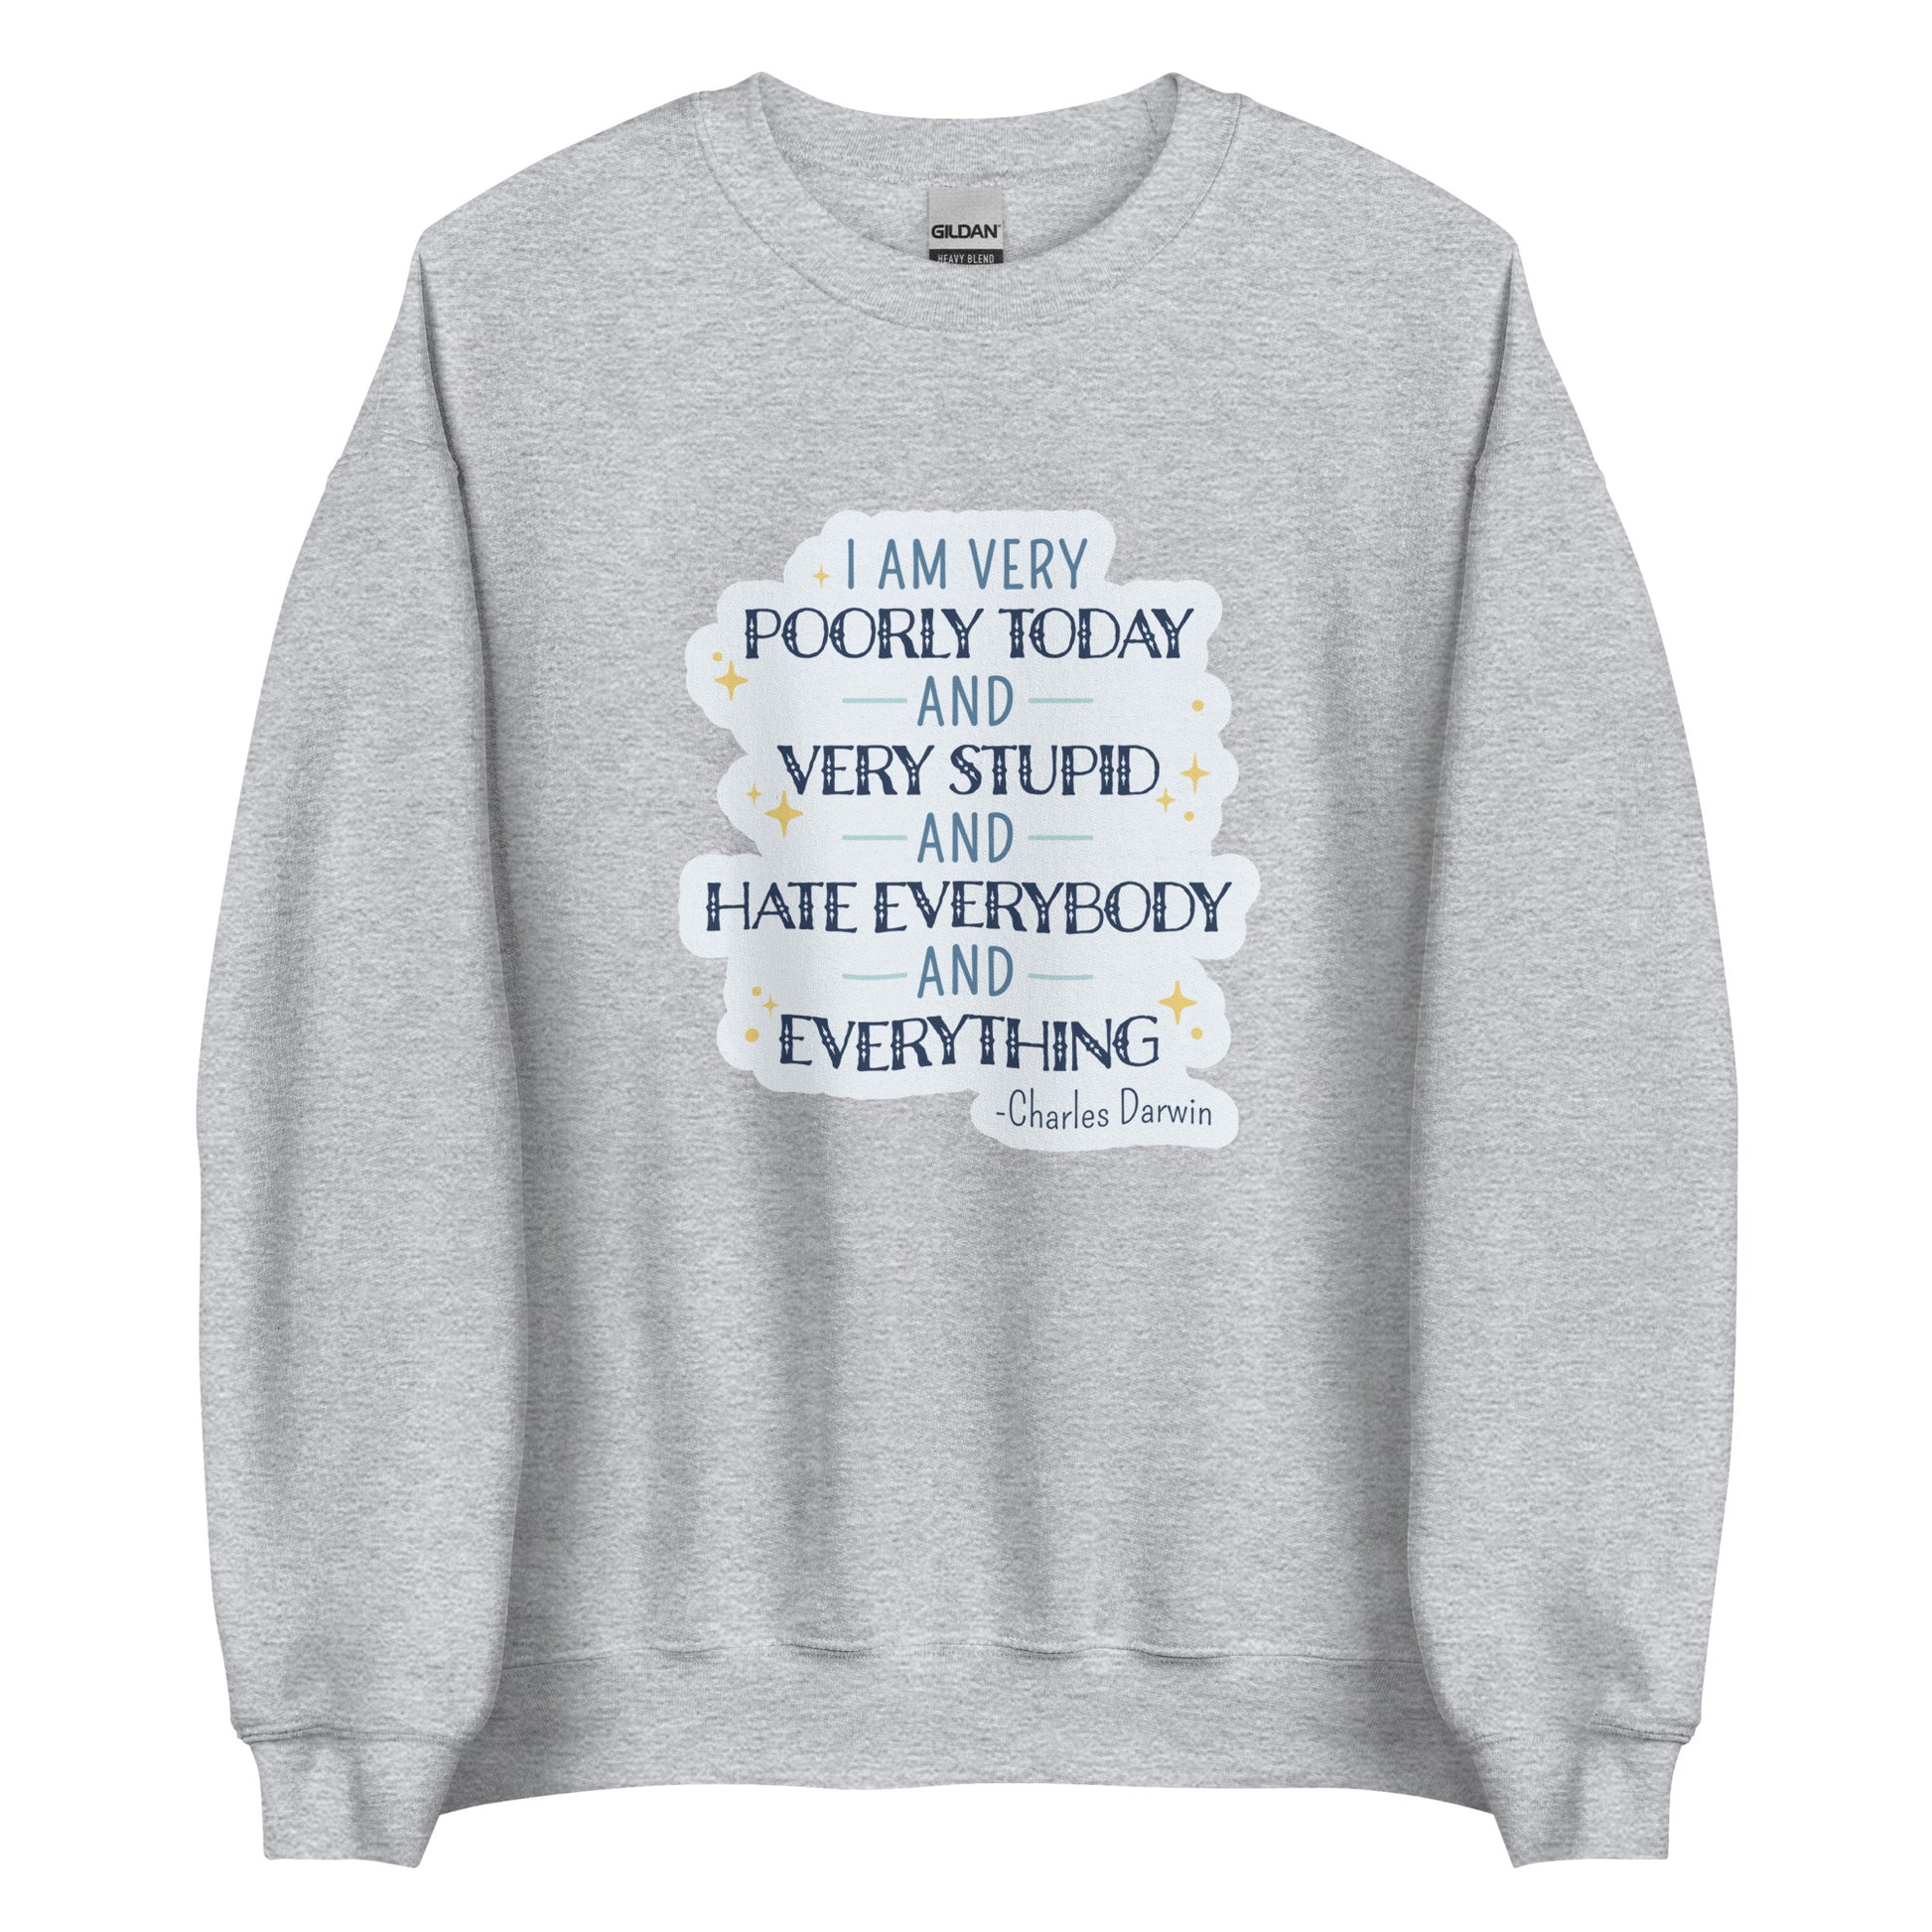 A light grey crewneck sweatshirt featuring a stylized quote from Charles Darwin in white and blue text. The quote reads "I am very poorly today and very stupid and hate everybody and everything."